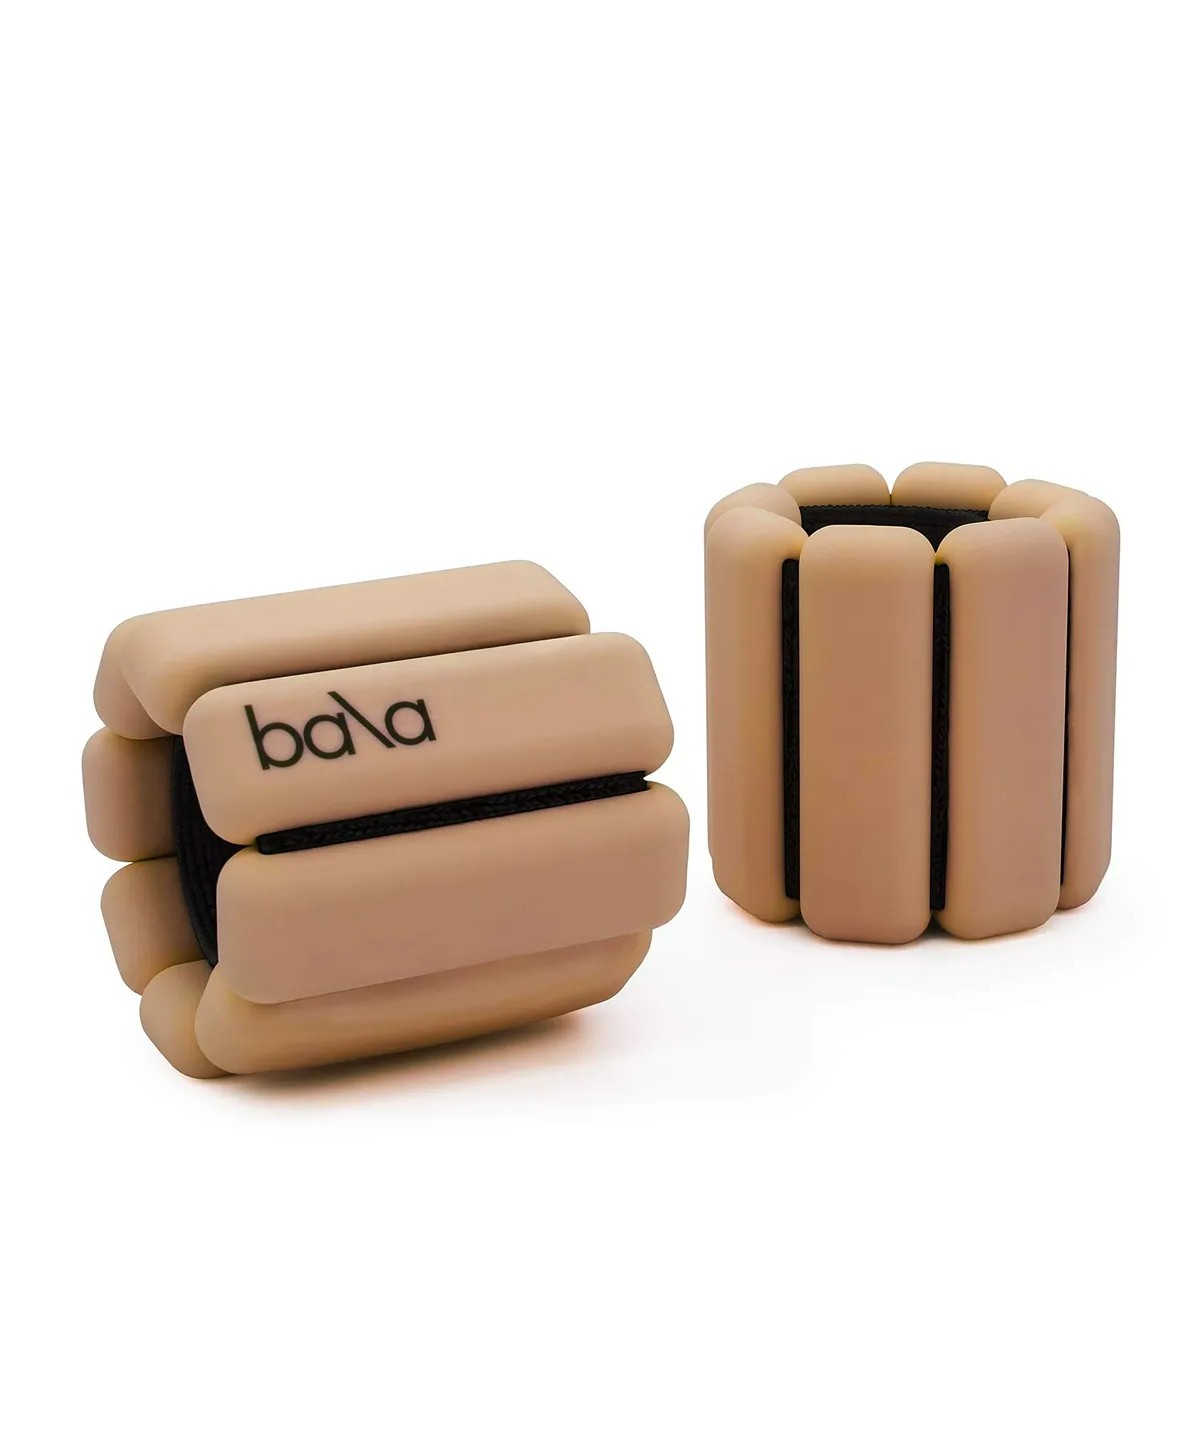 Image of two 1lb Bala weights in the colour sand.